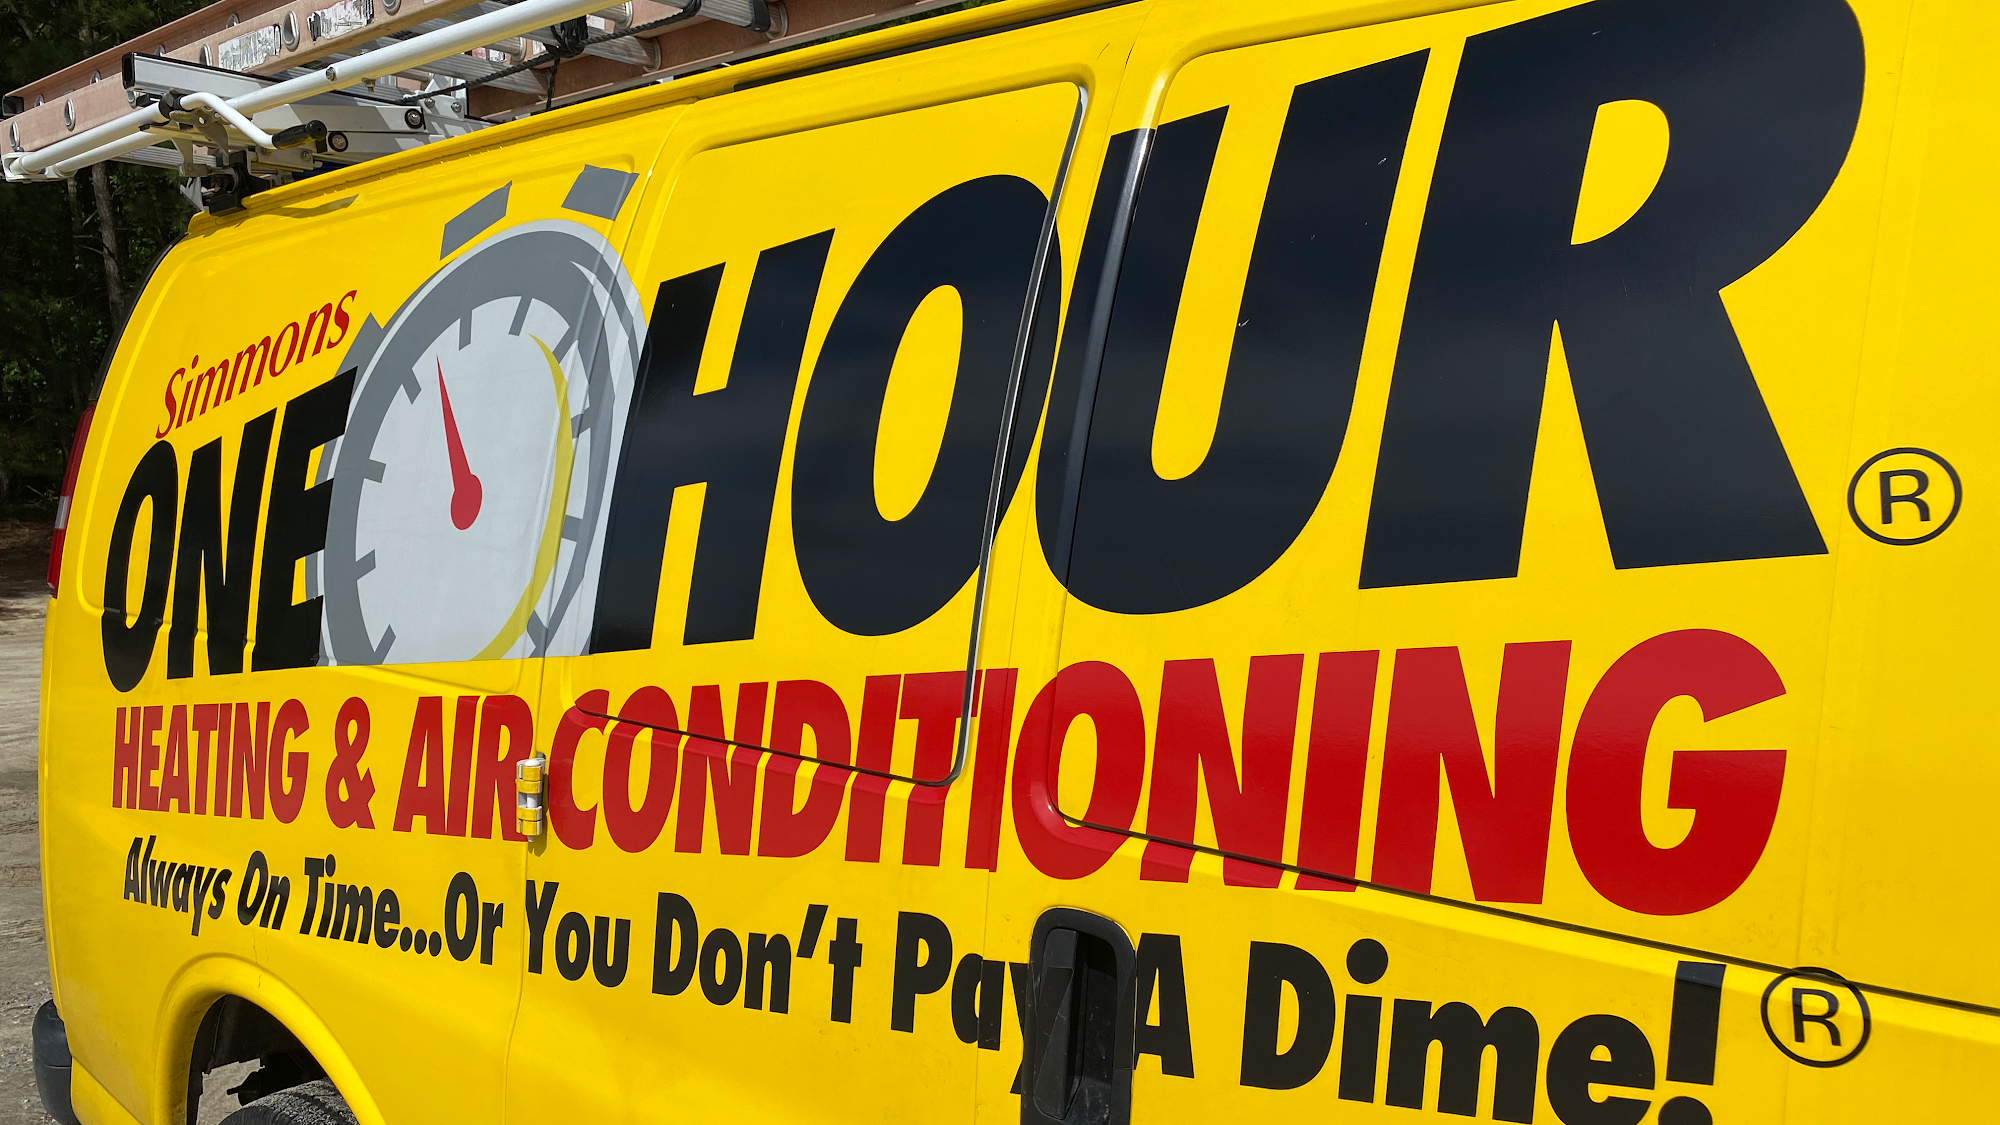 Simmons One Hour Heating and Air Conditioning